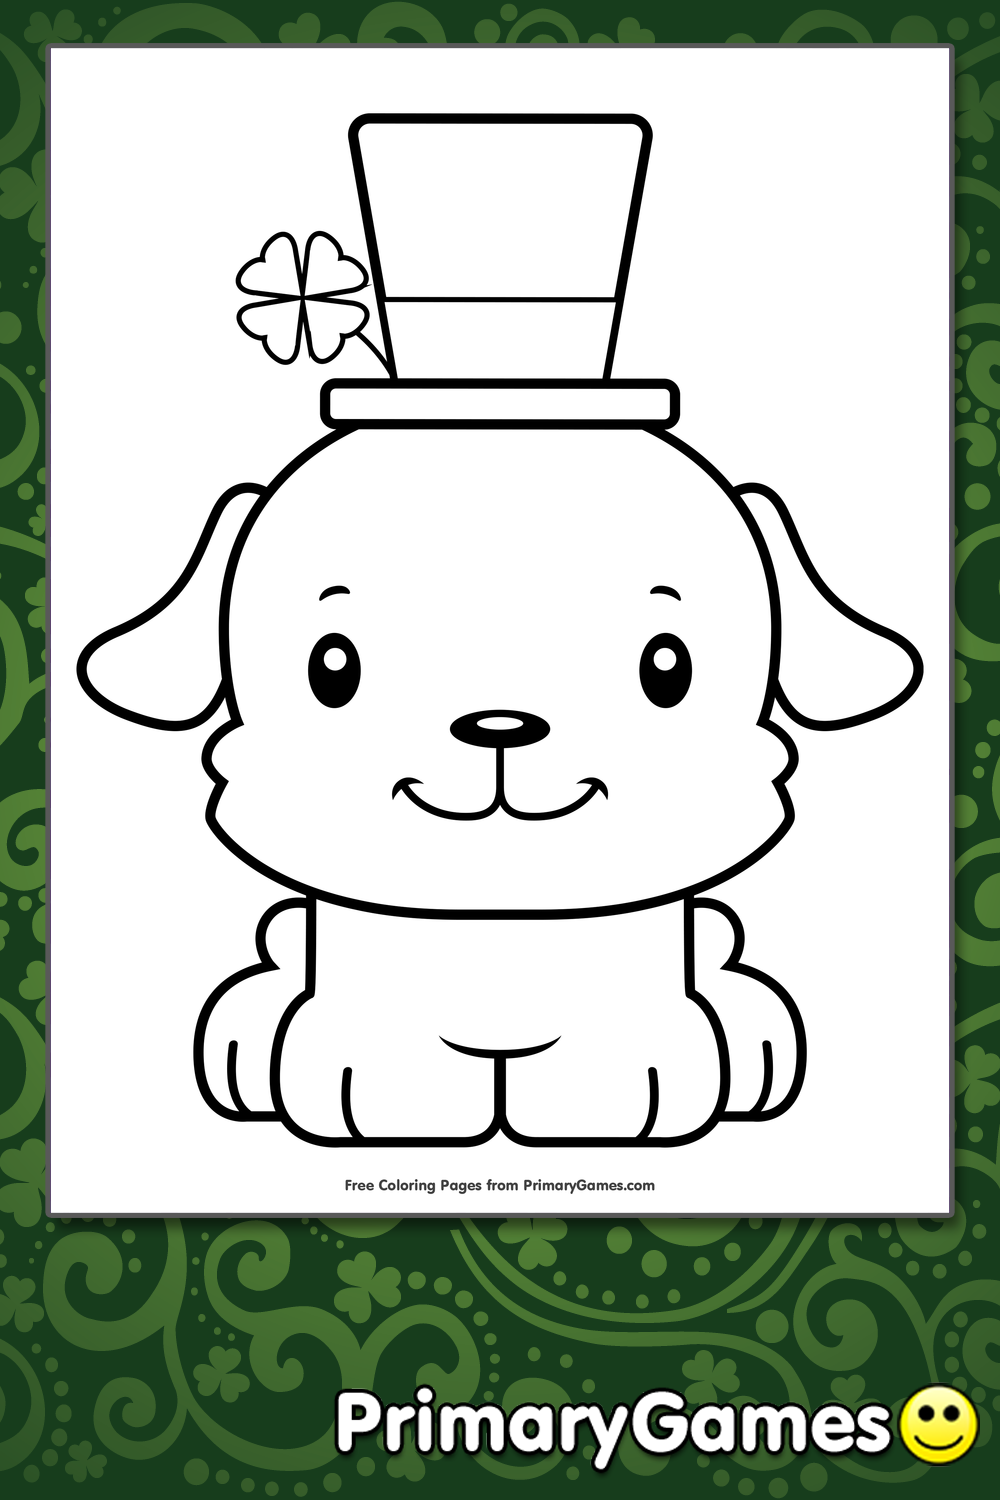 St. Patrick's Day Puppy Coloring Page • FREE Printable PDF from ...